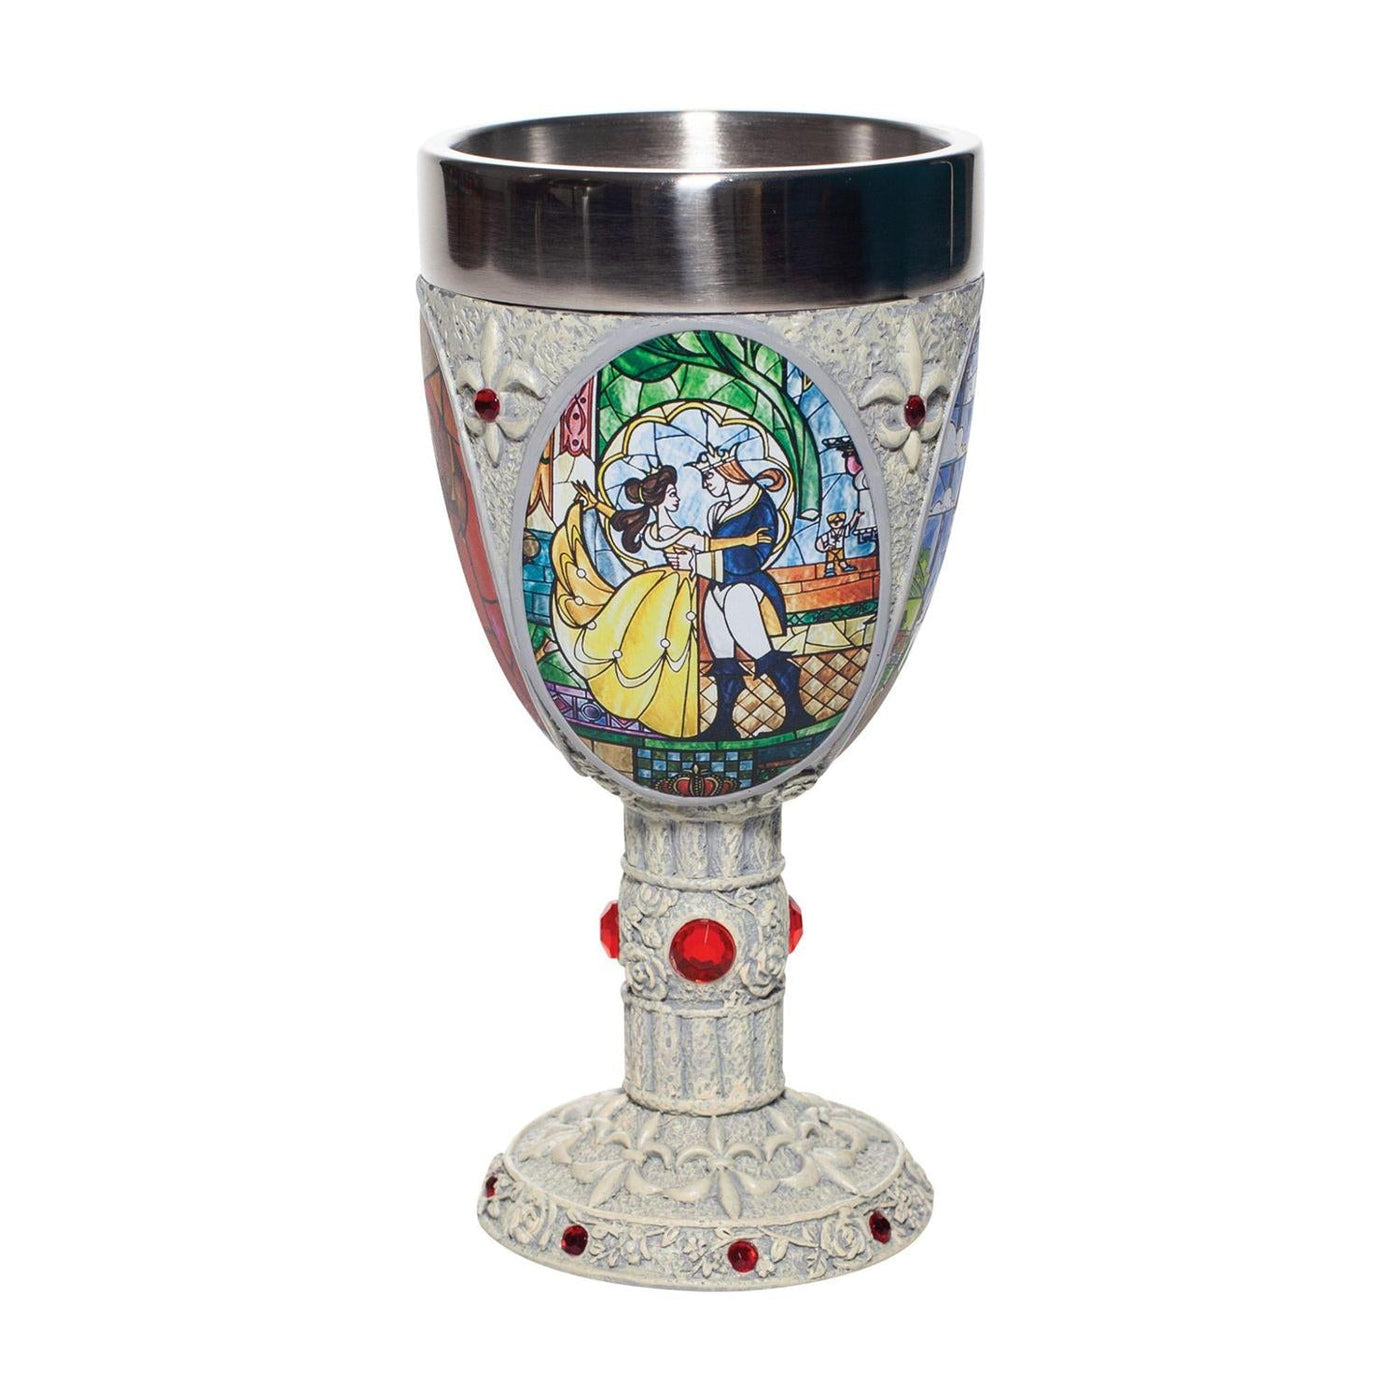 Beauty and the Beast Goblet - Official Disney Licensed